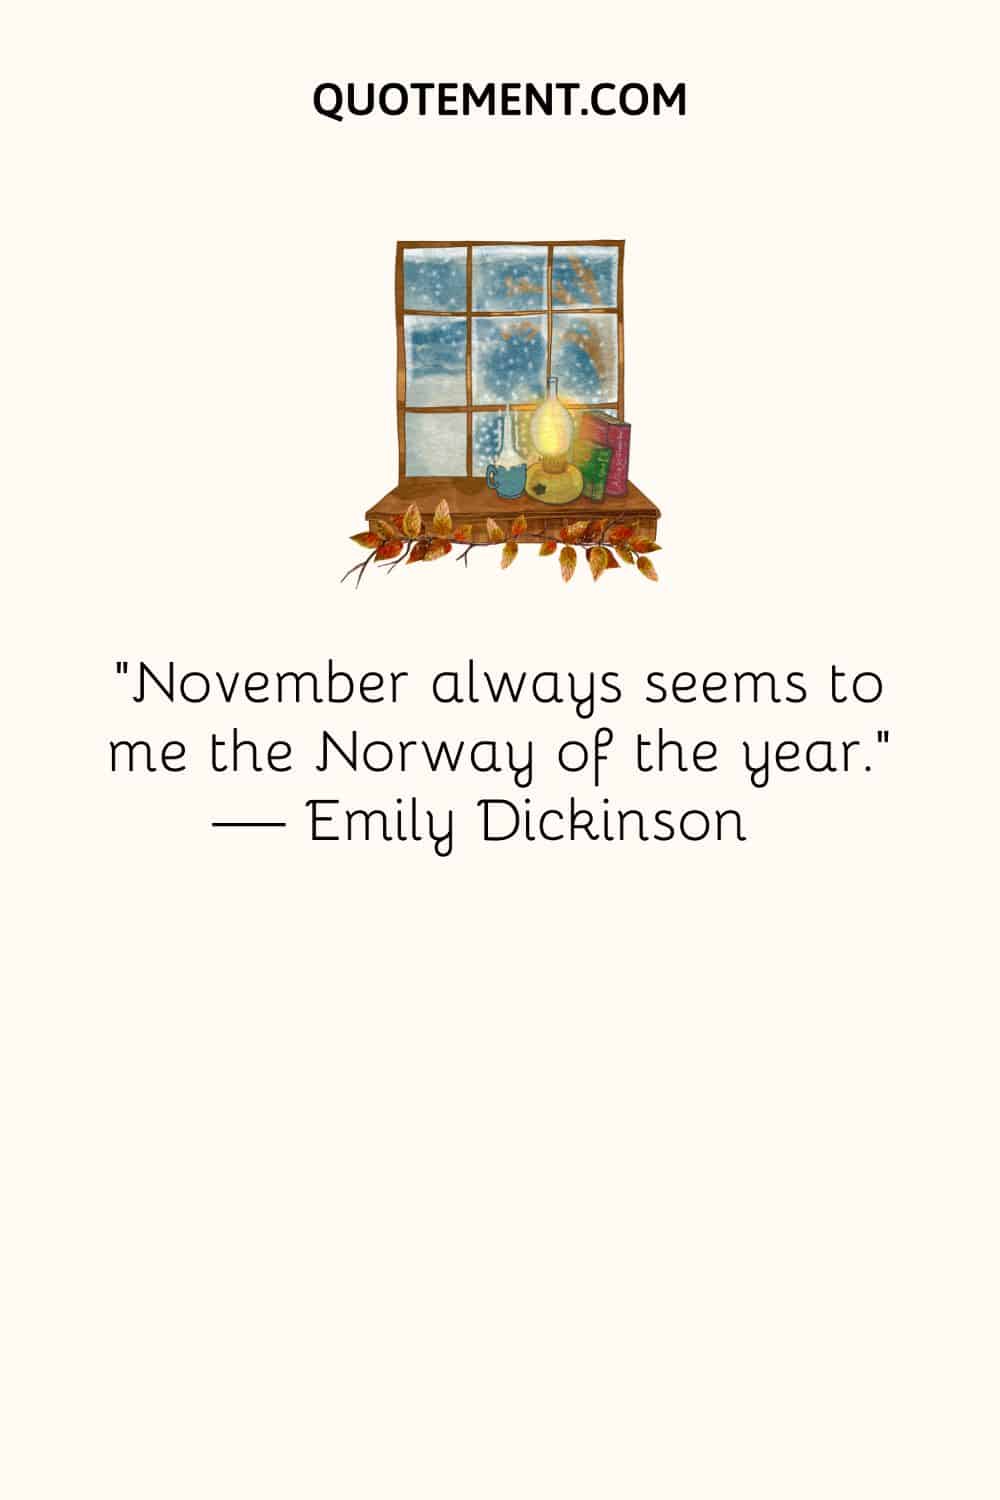 November always seems to me the Norway of the year